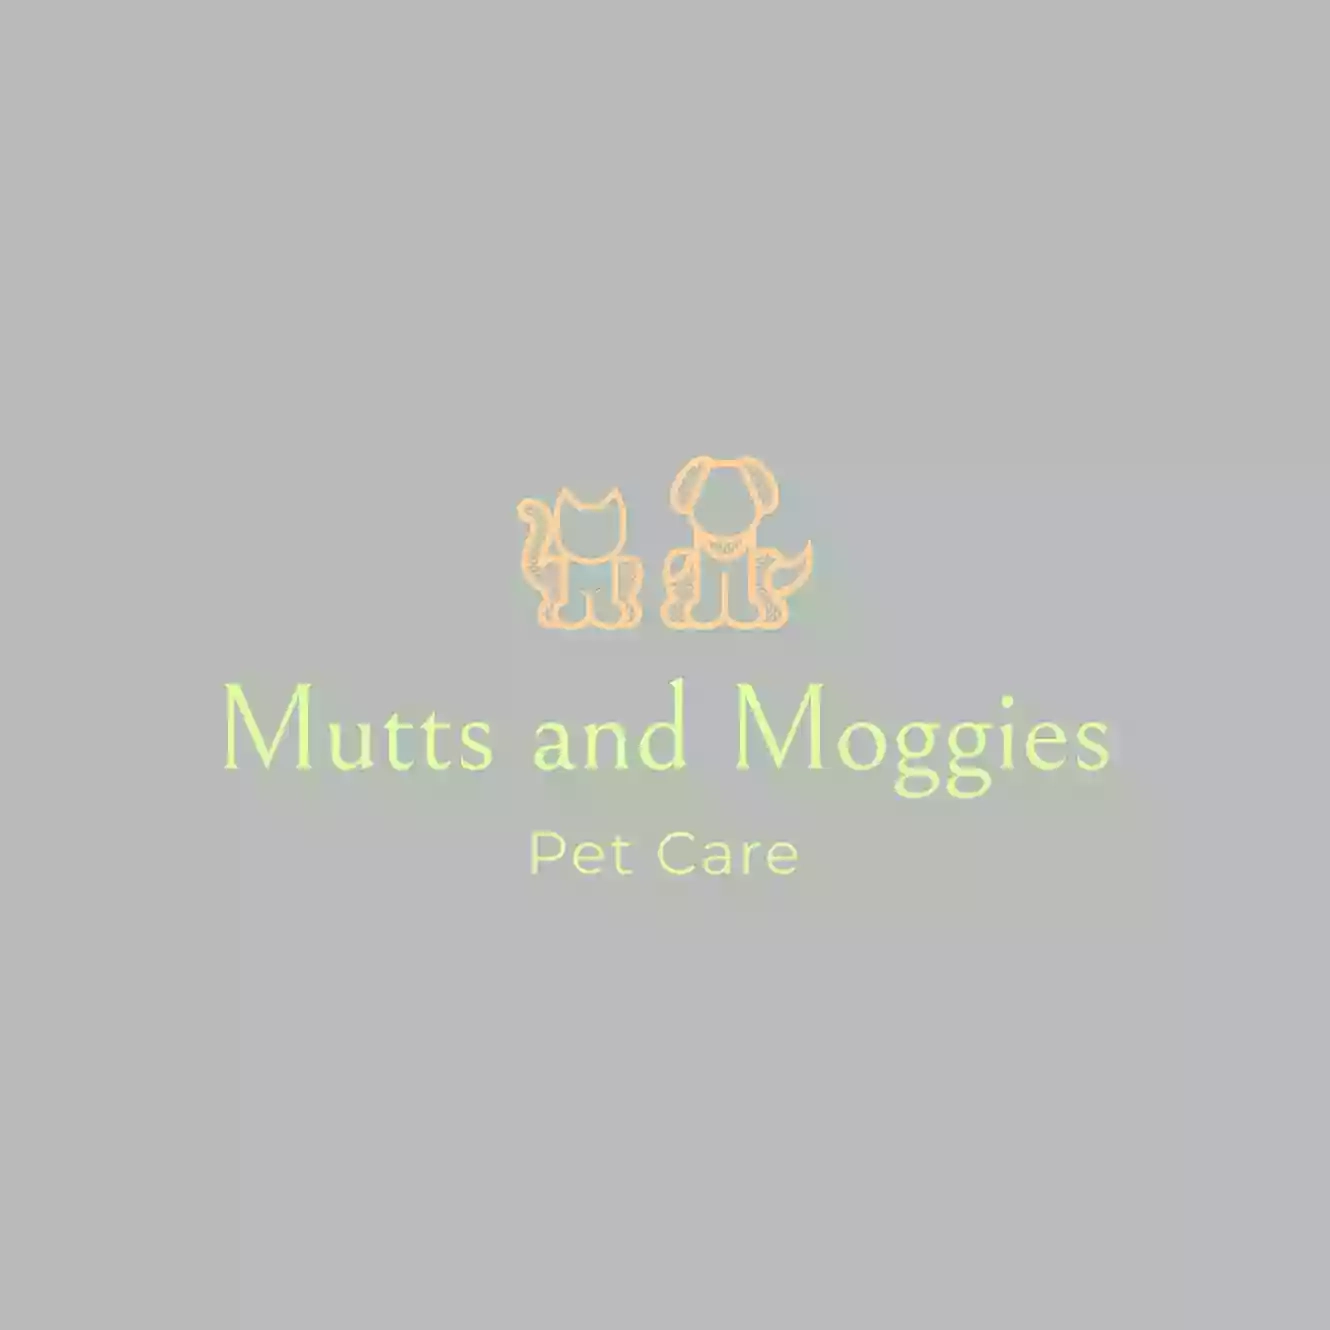 Mutts and Moggies Pet Care